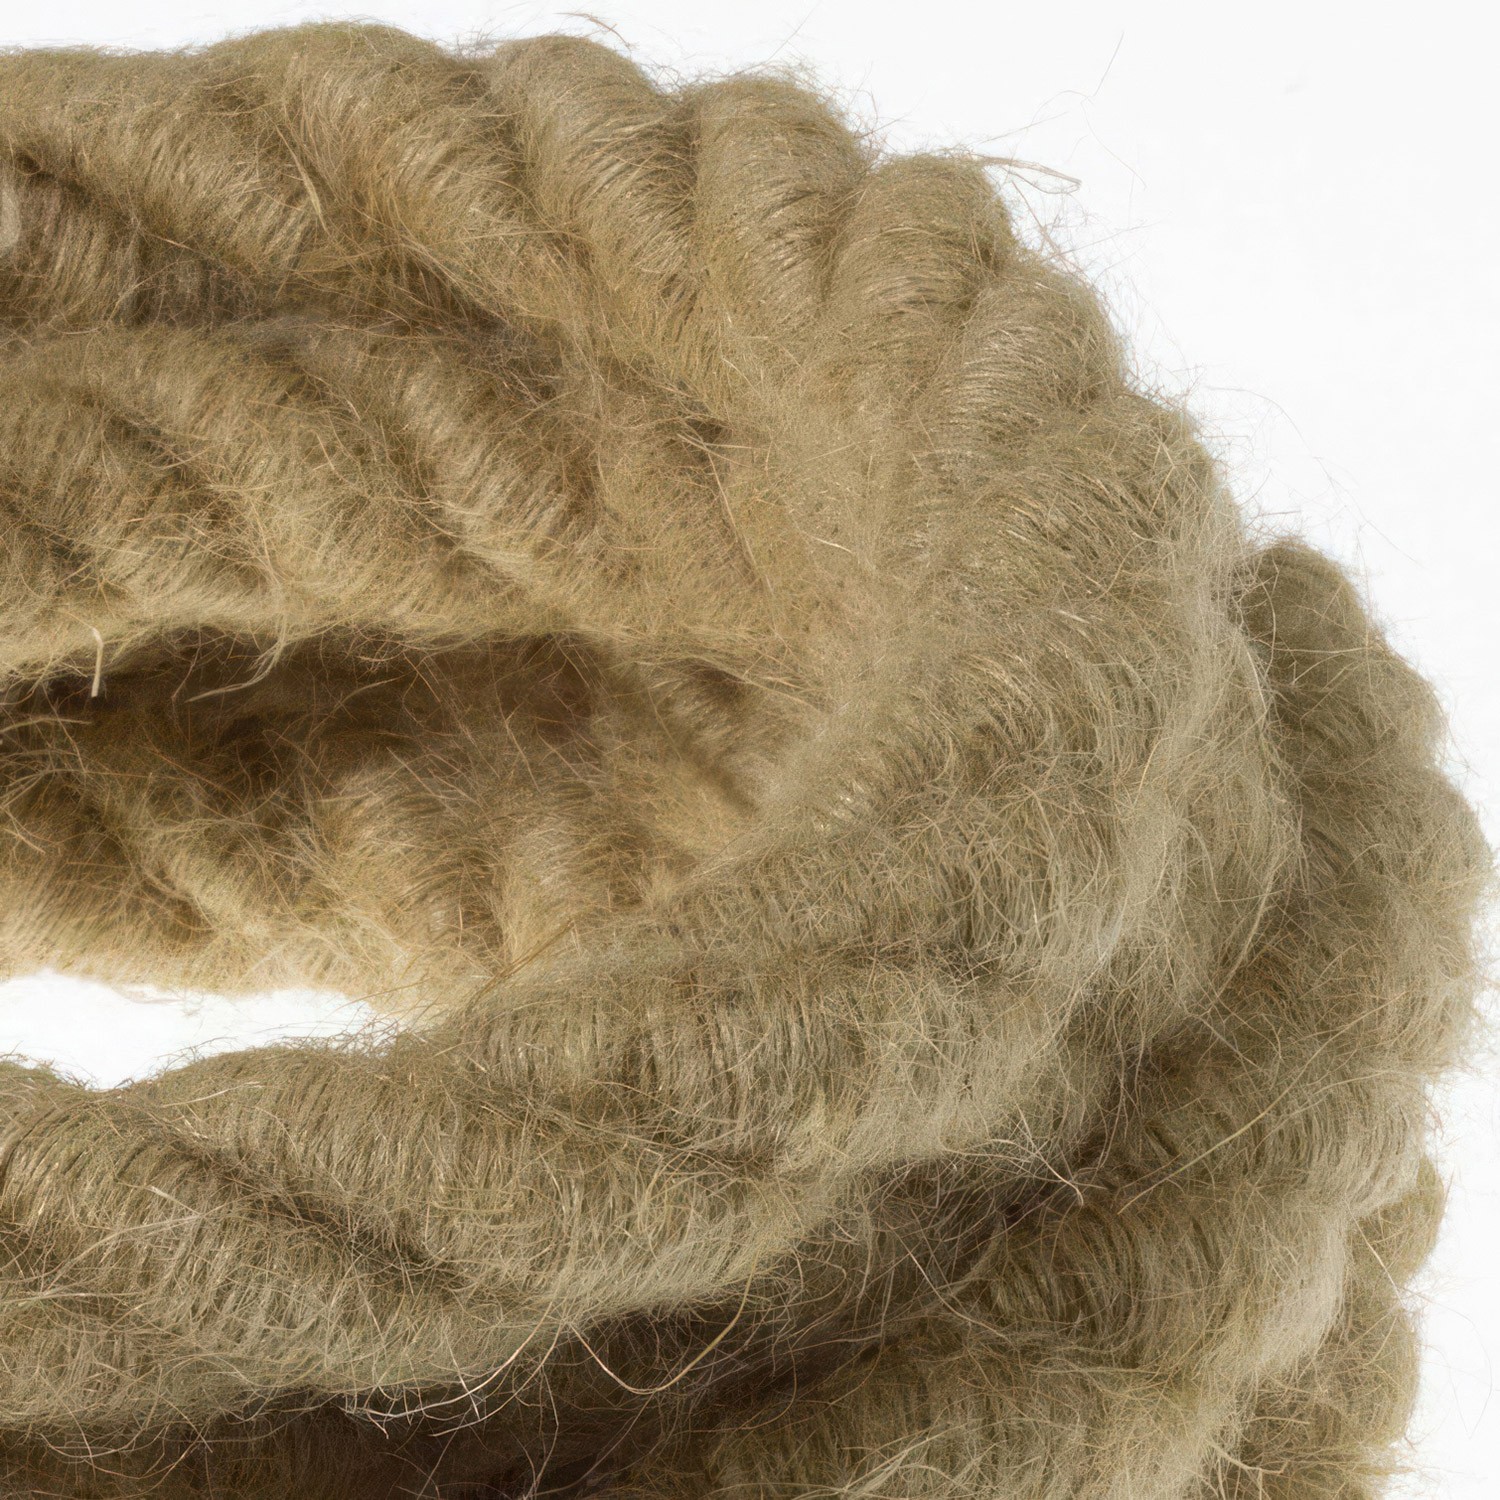 2XL electrical cord, electrical cable 3x0,75. Rough jute fabric covering. Diameter 24mm.